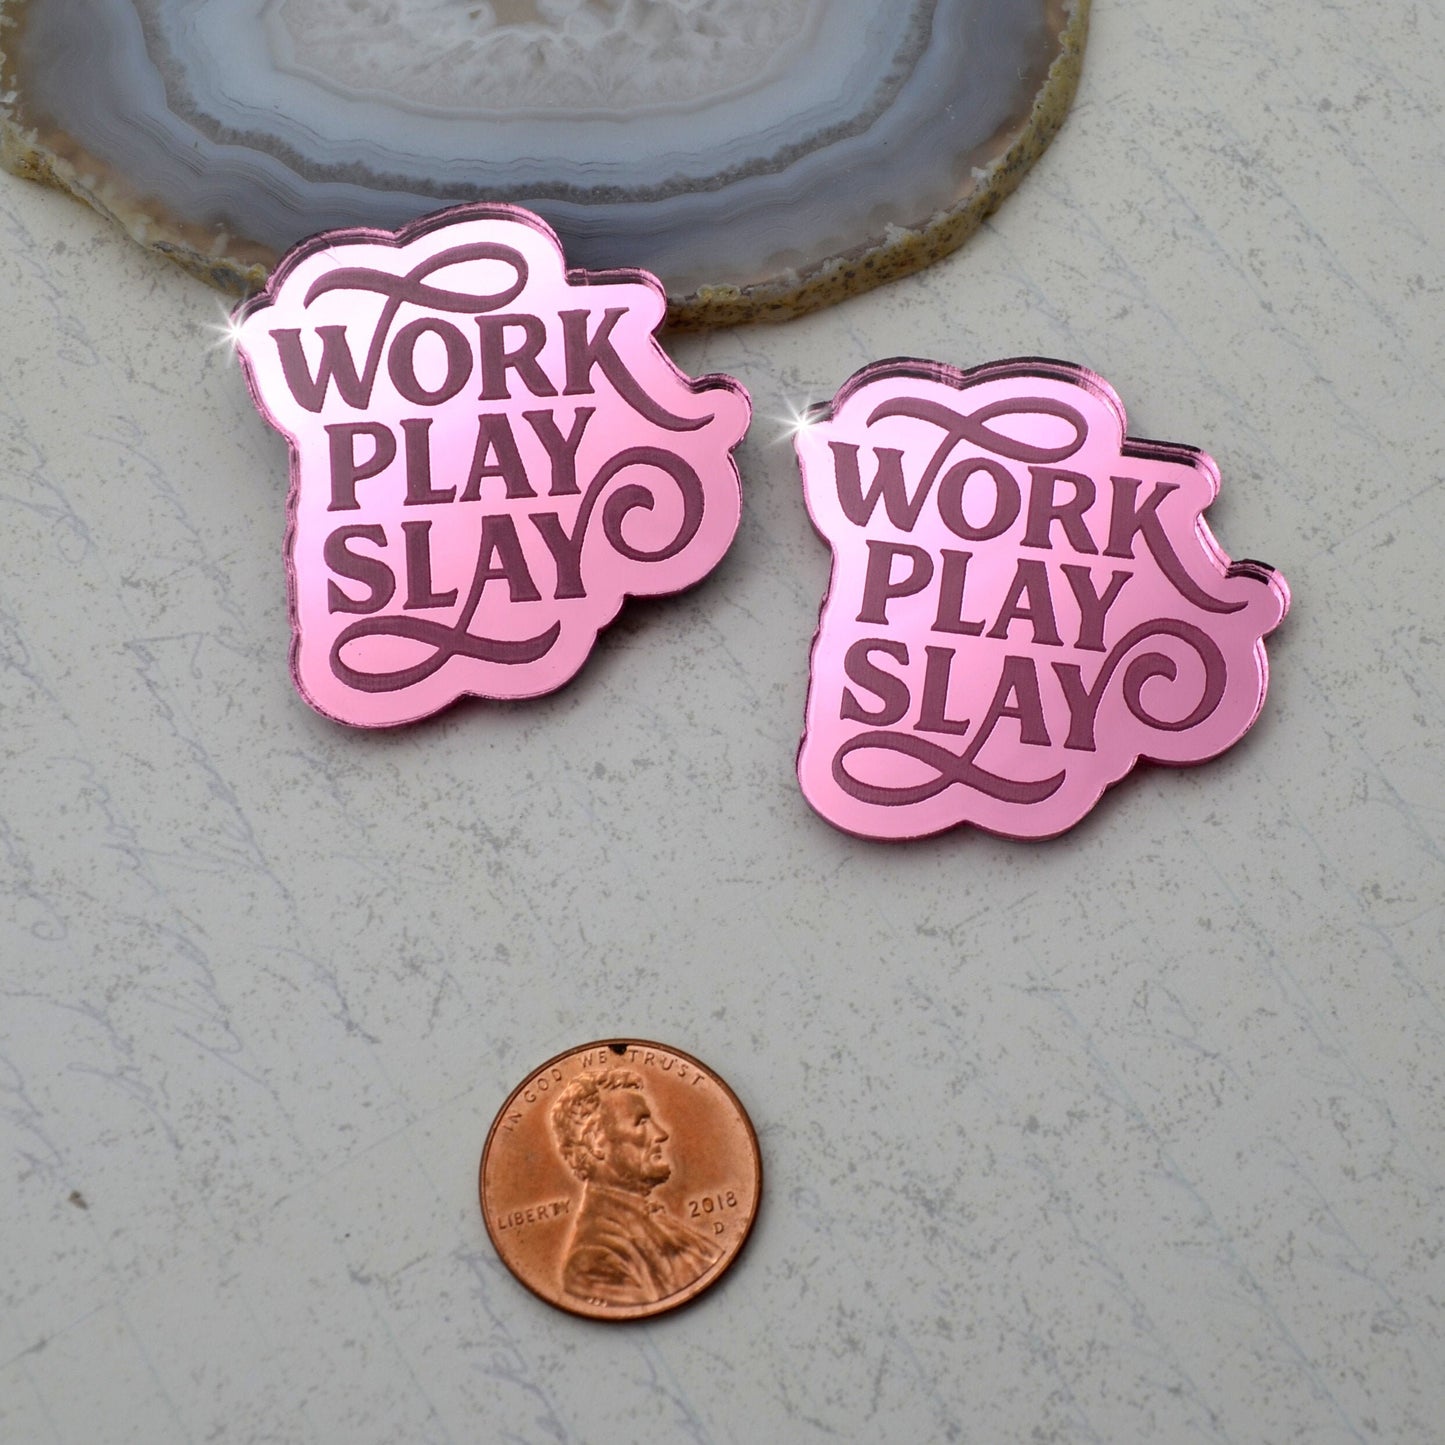 WORK PLAY SLAY Cabochons Pink Mirror Laser Cut Acrylic Cabs Set of 2